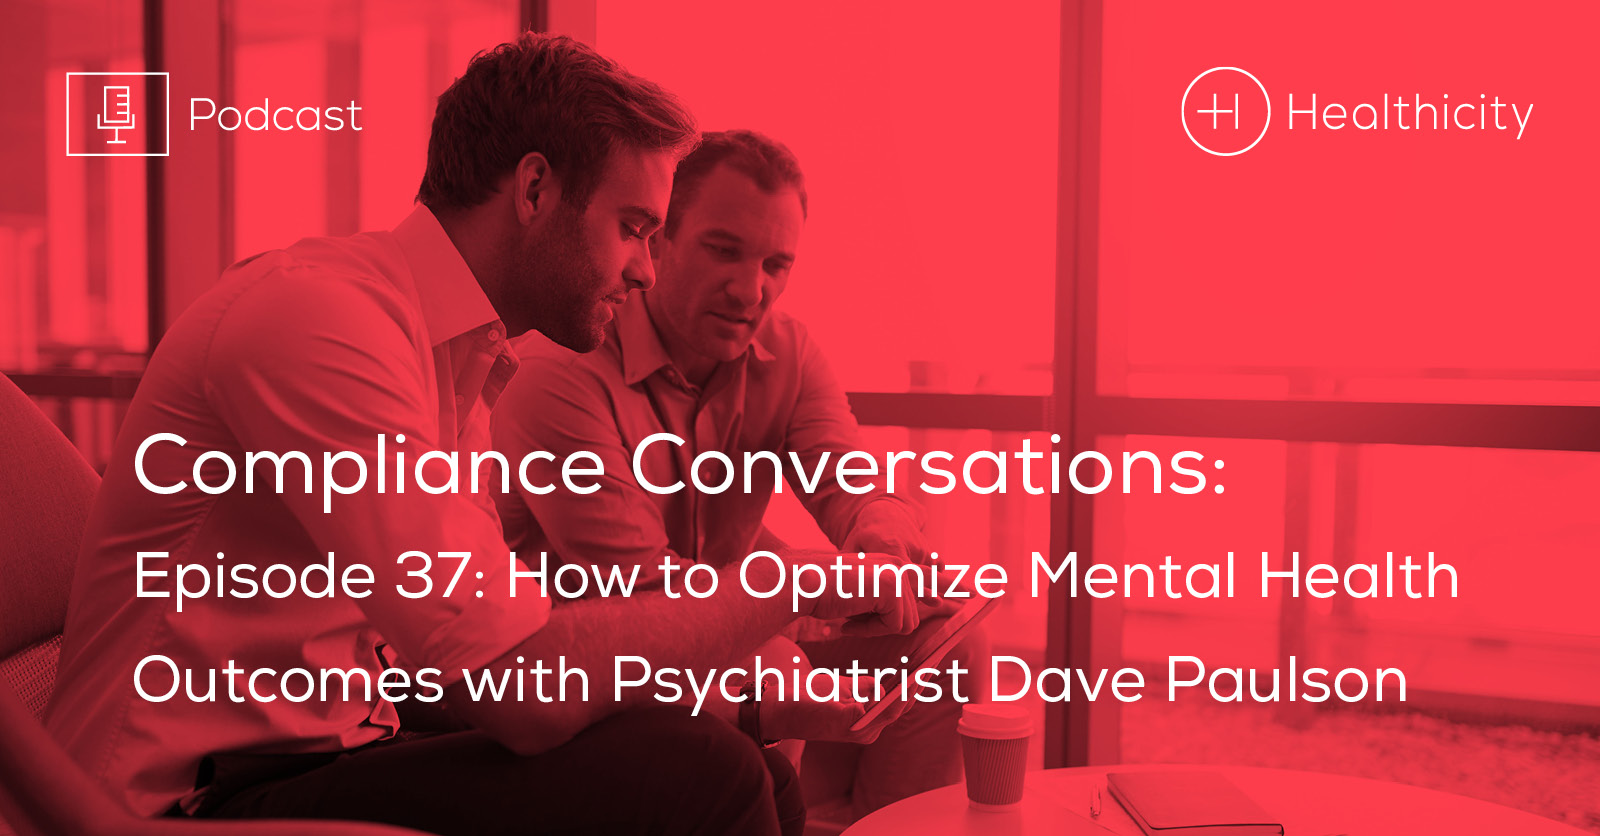 Listen to the Episode - How to Optimize Mental Health Outcomes with Psychiatrist Dave Paulson